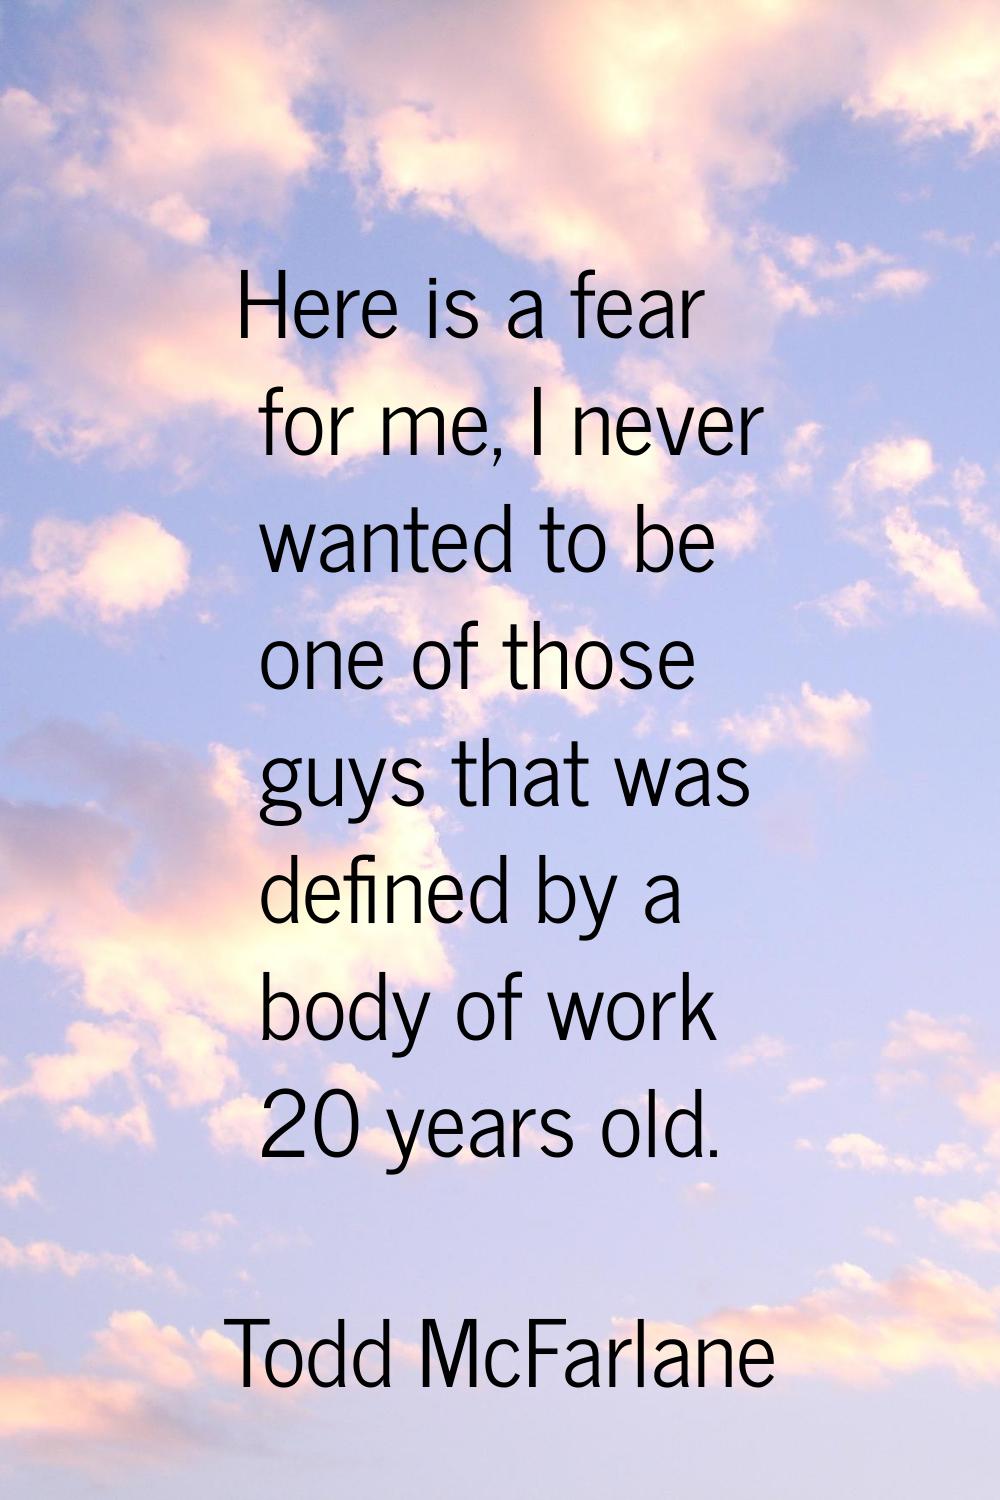 Here is a fear for me, I never wanted to be one of those guys that was defined by a body of work 20